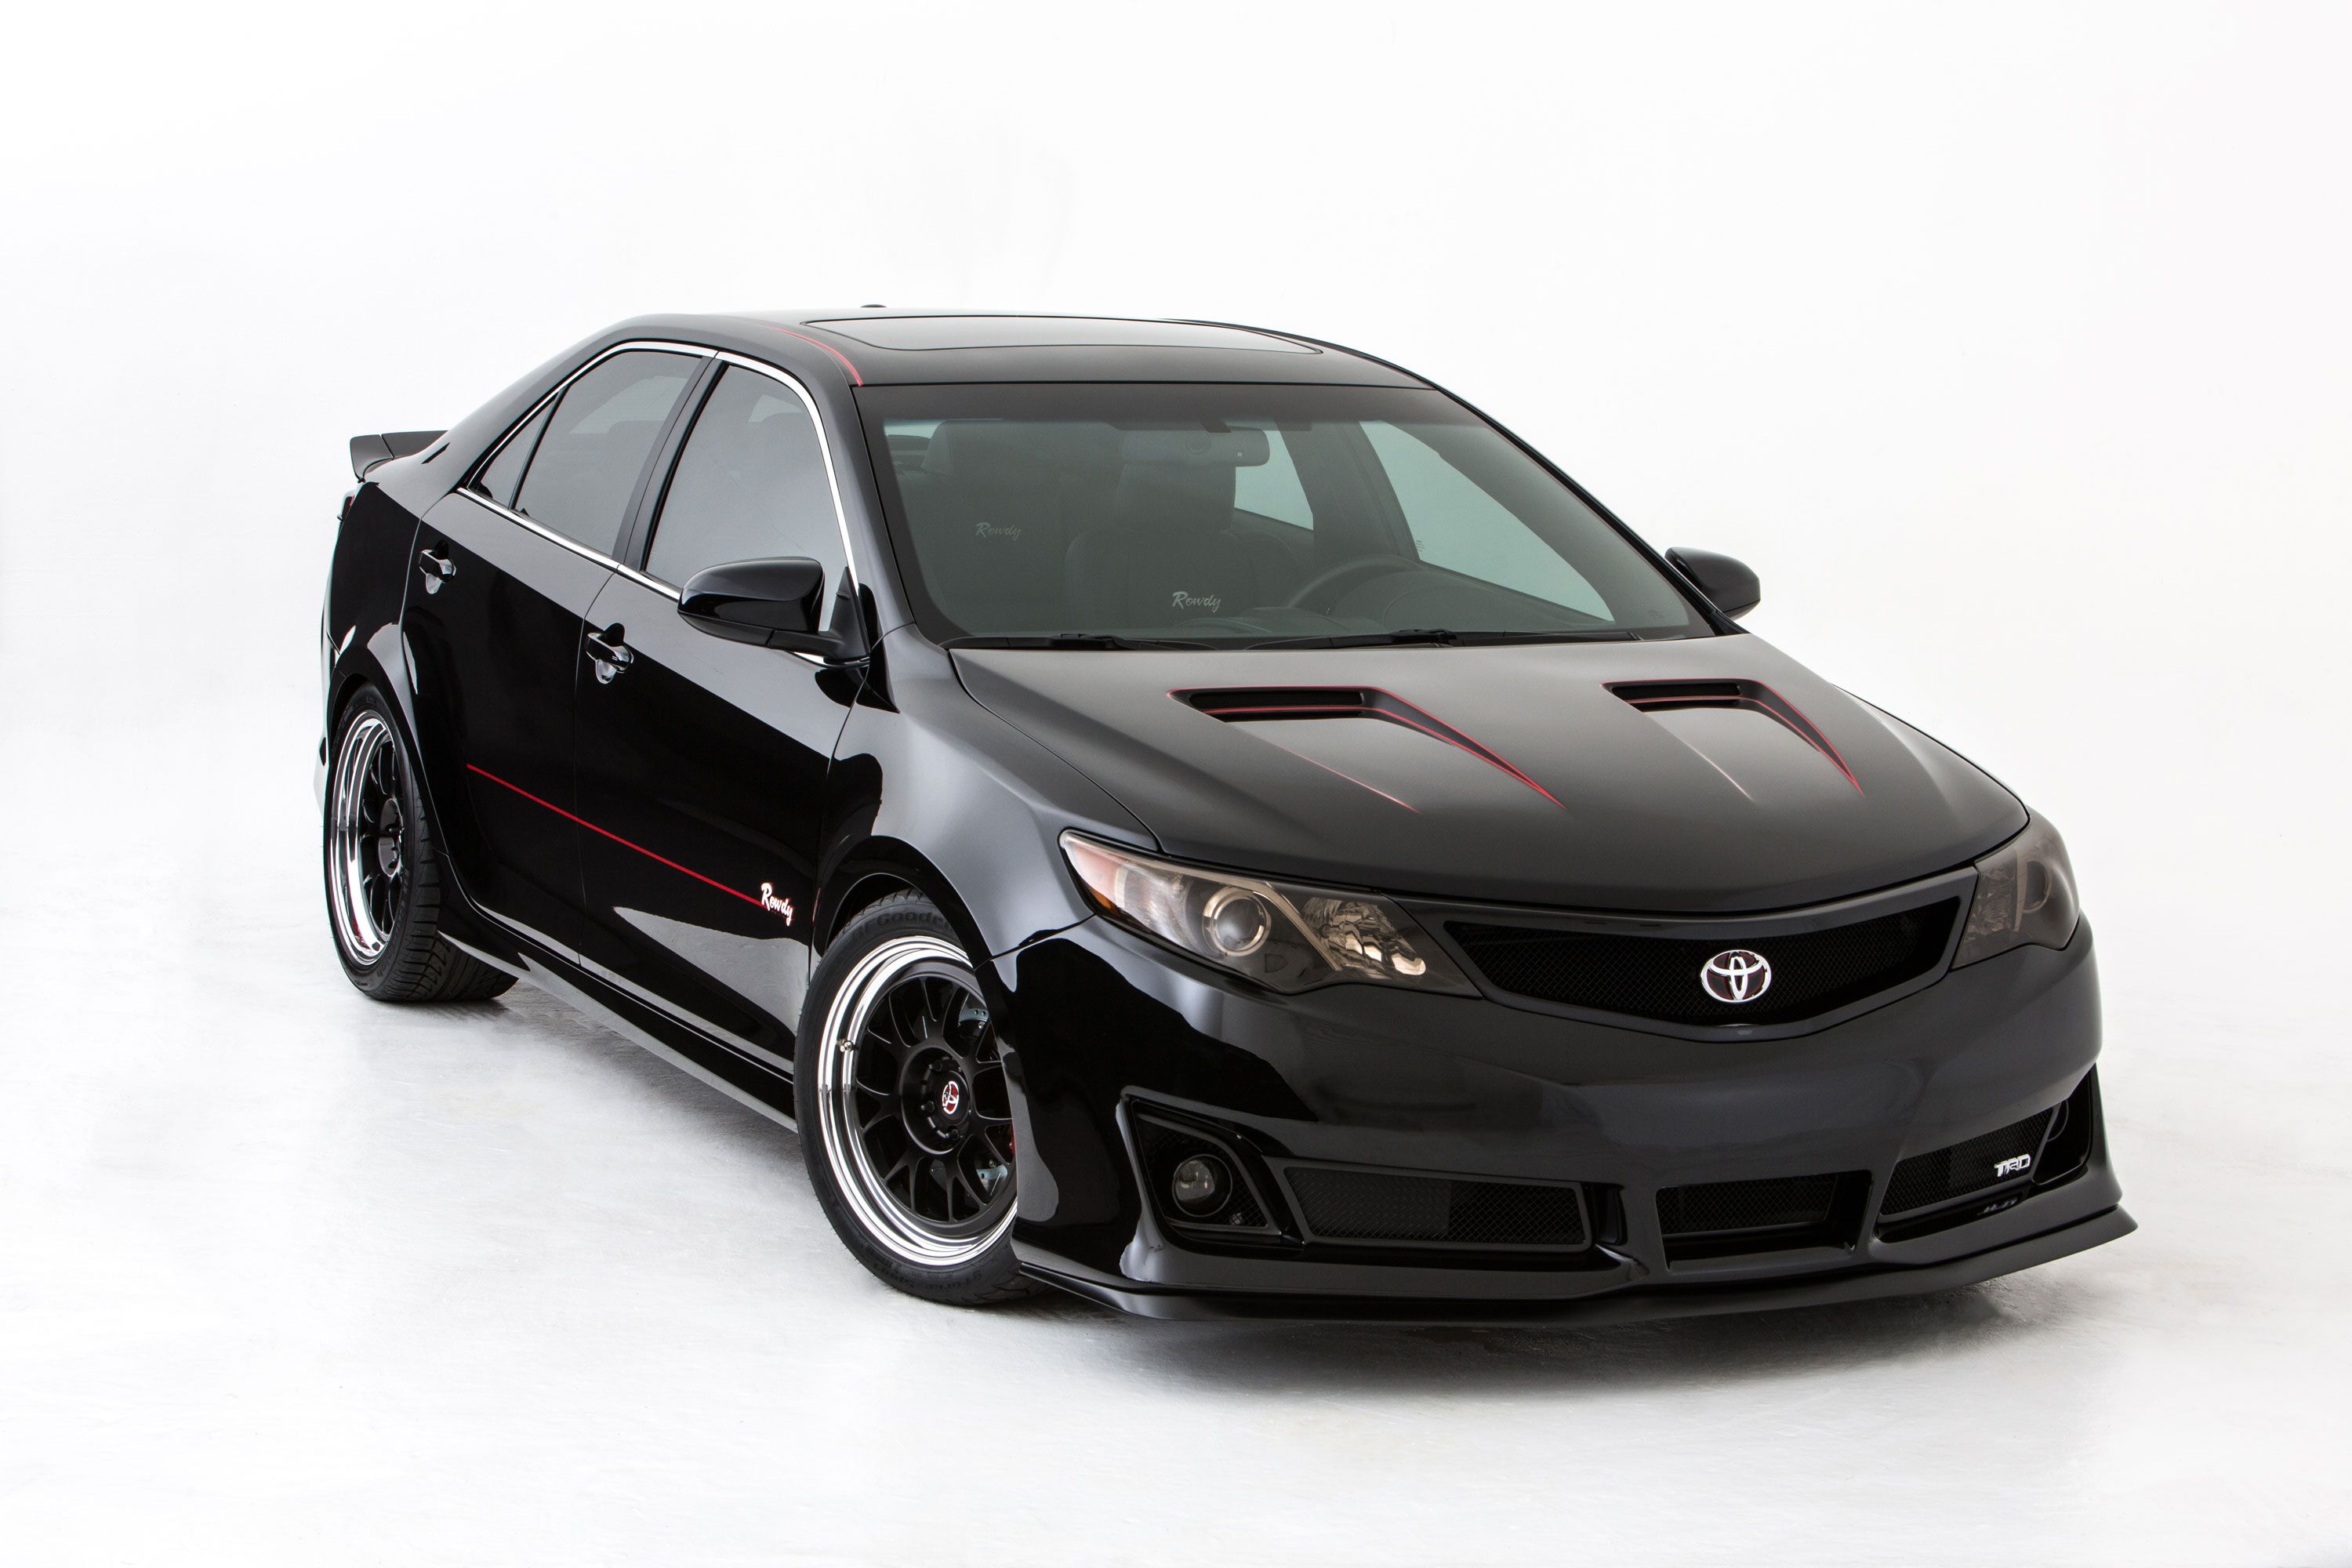 2013 Toyota Camry Rowdy Edition by Kyle Busch